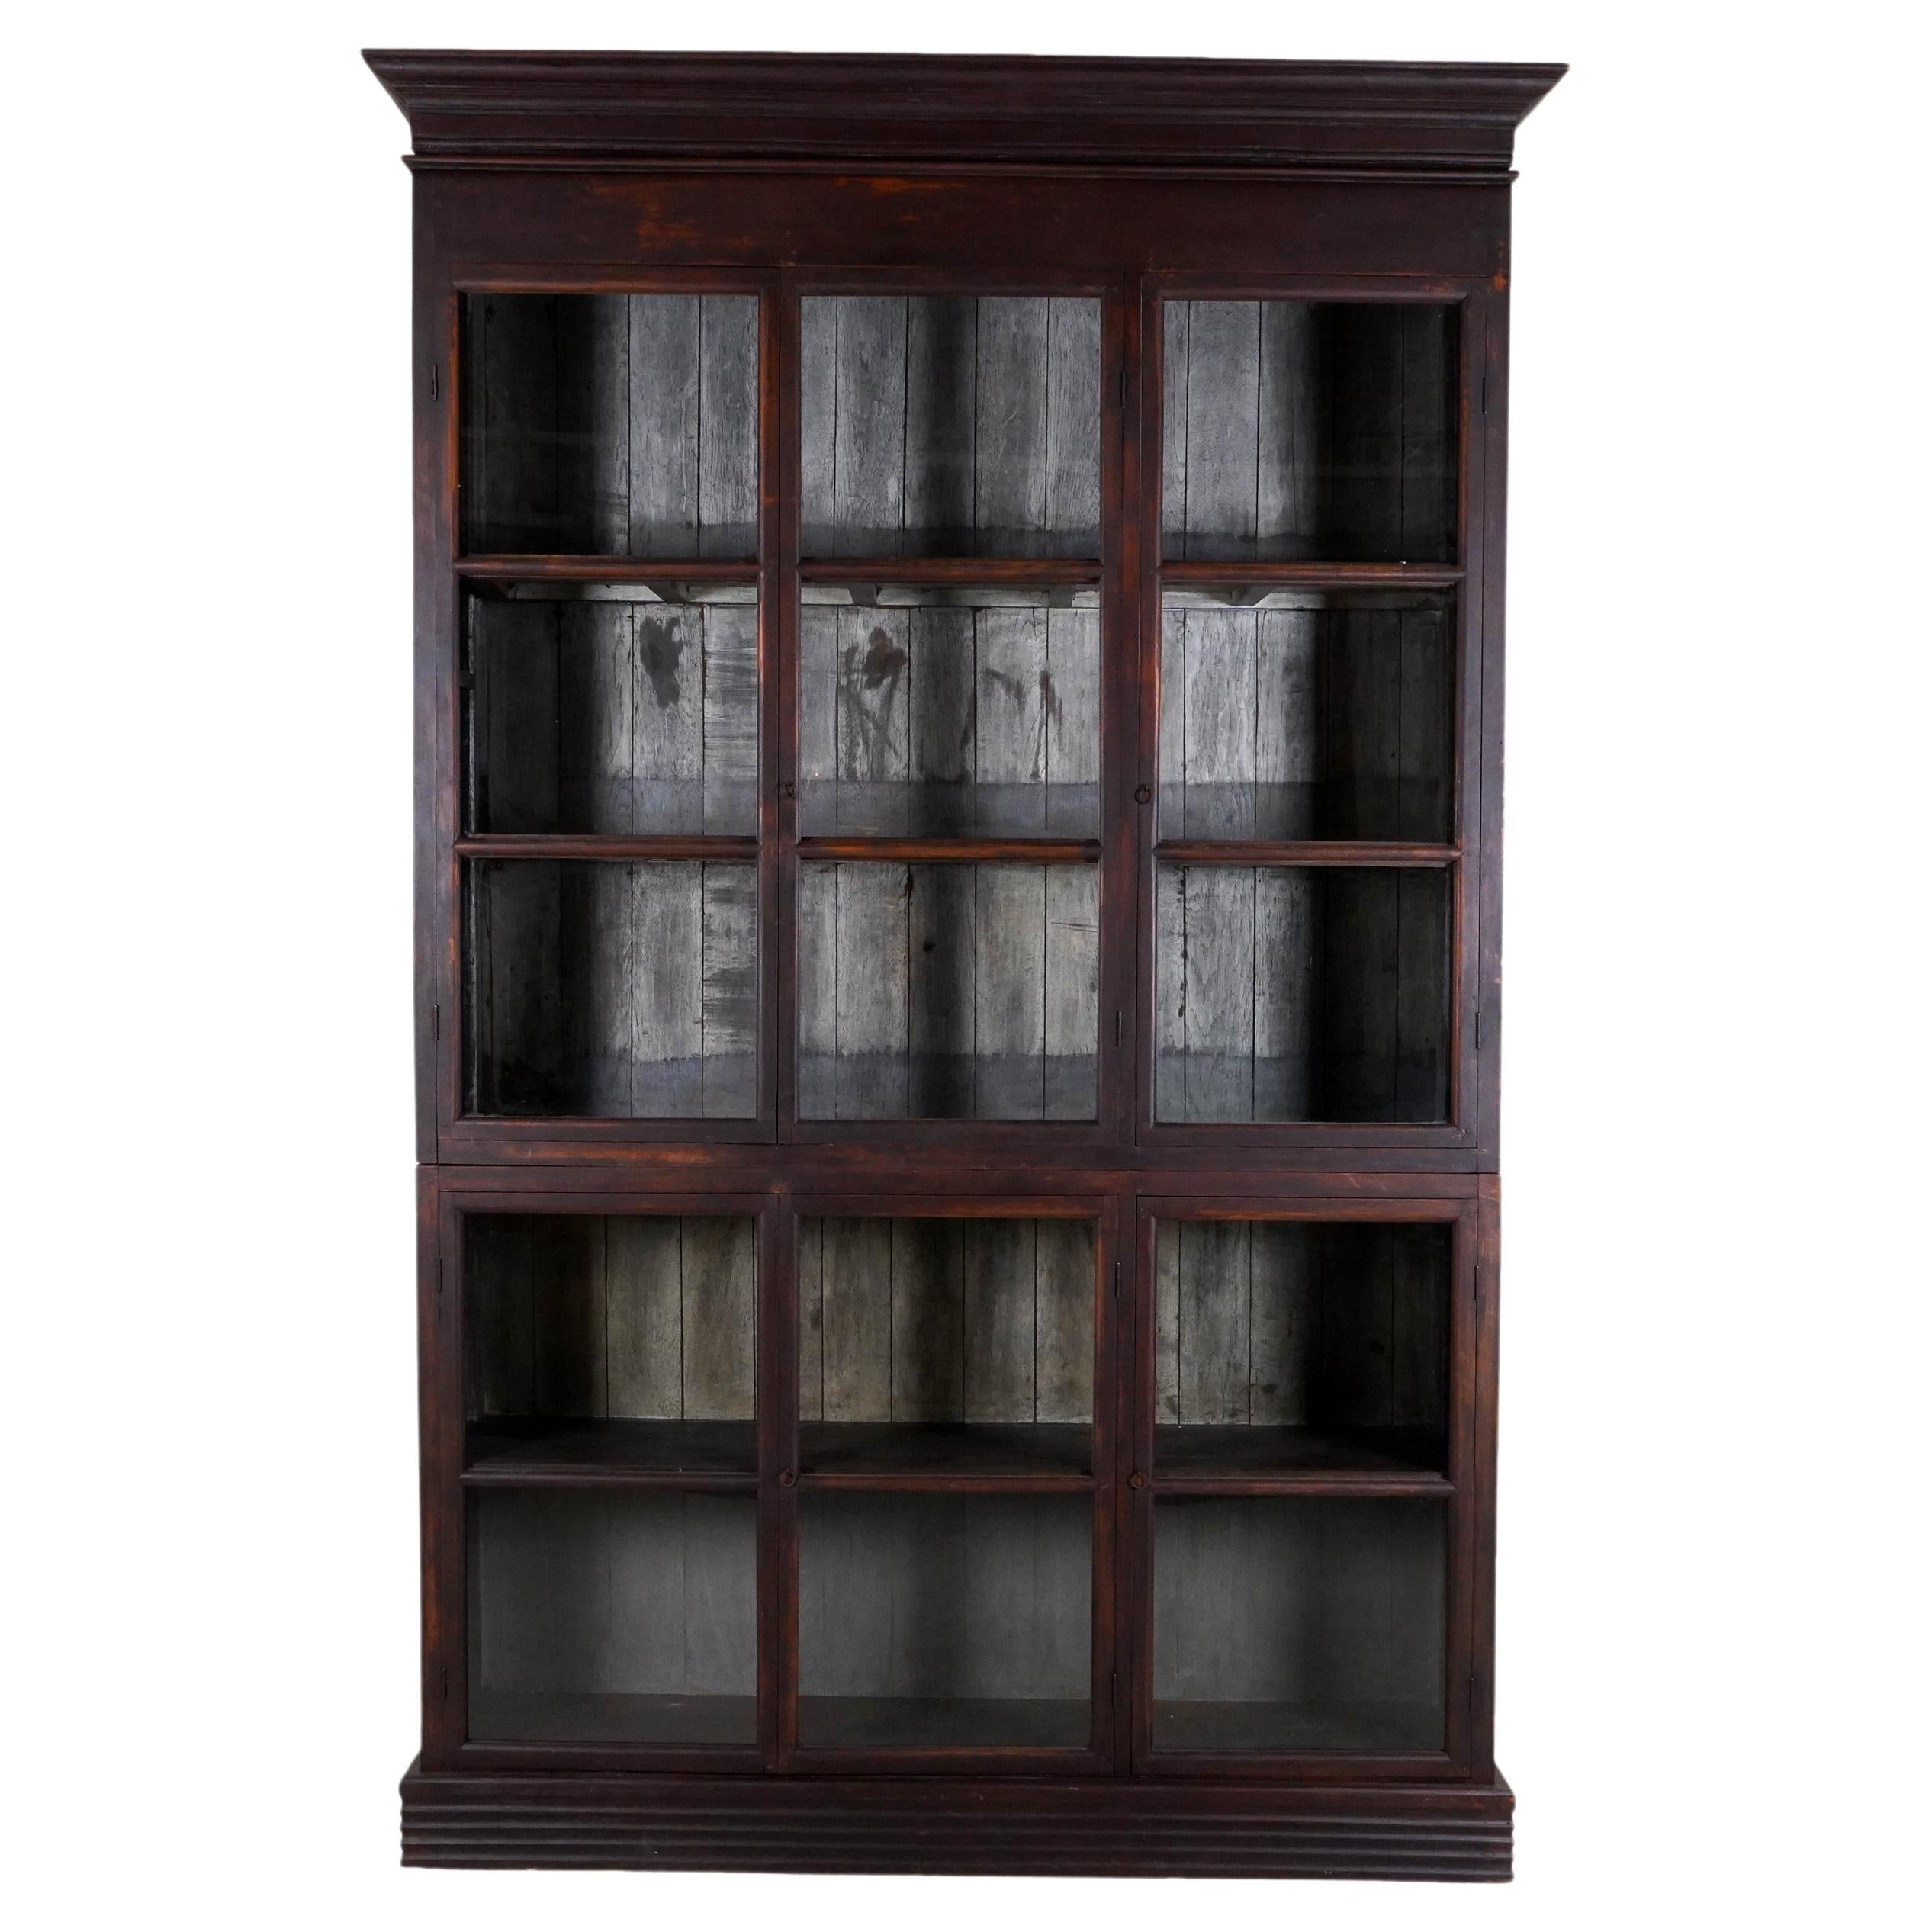 A British Colonial Teak Wood Bookcase For Sale